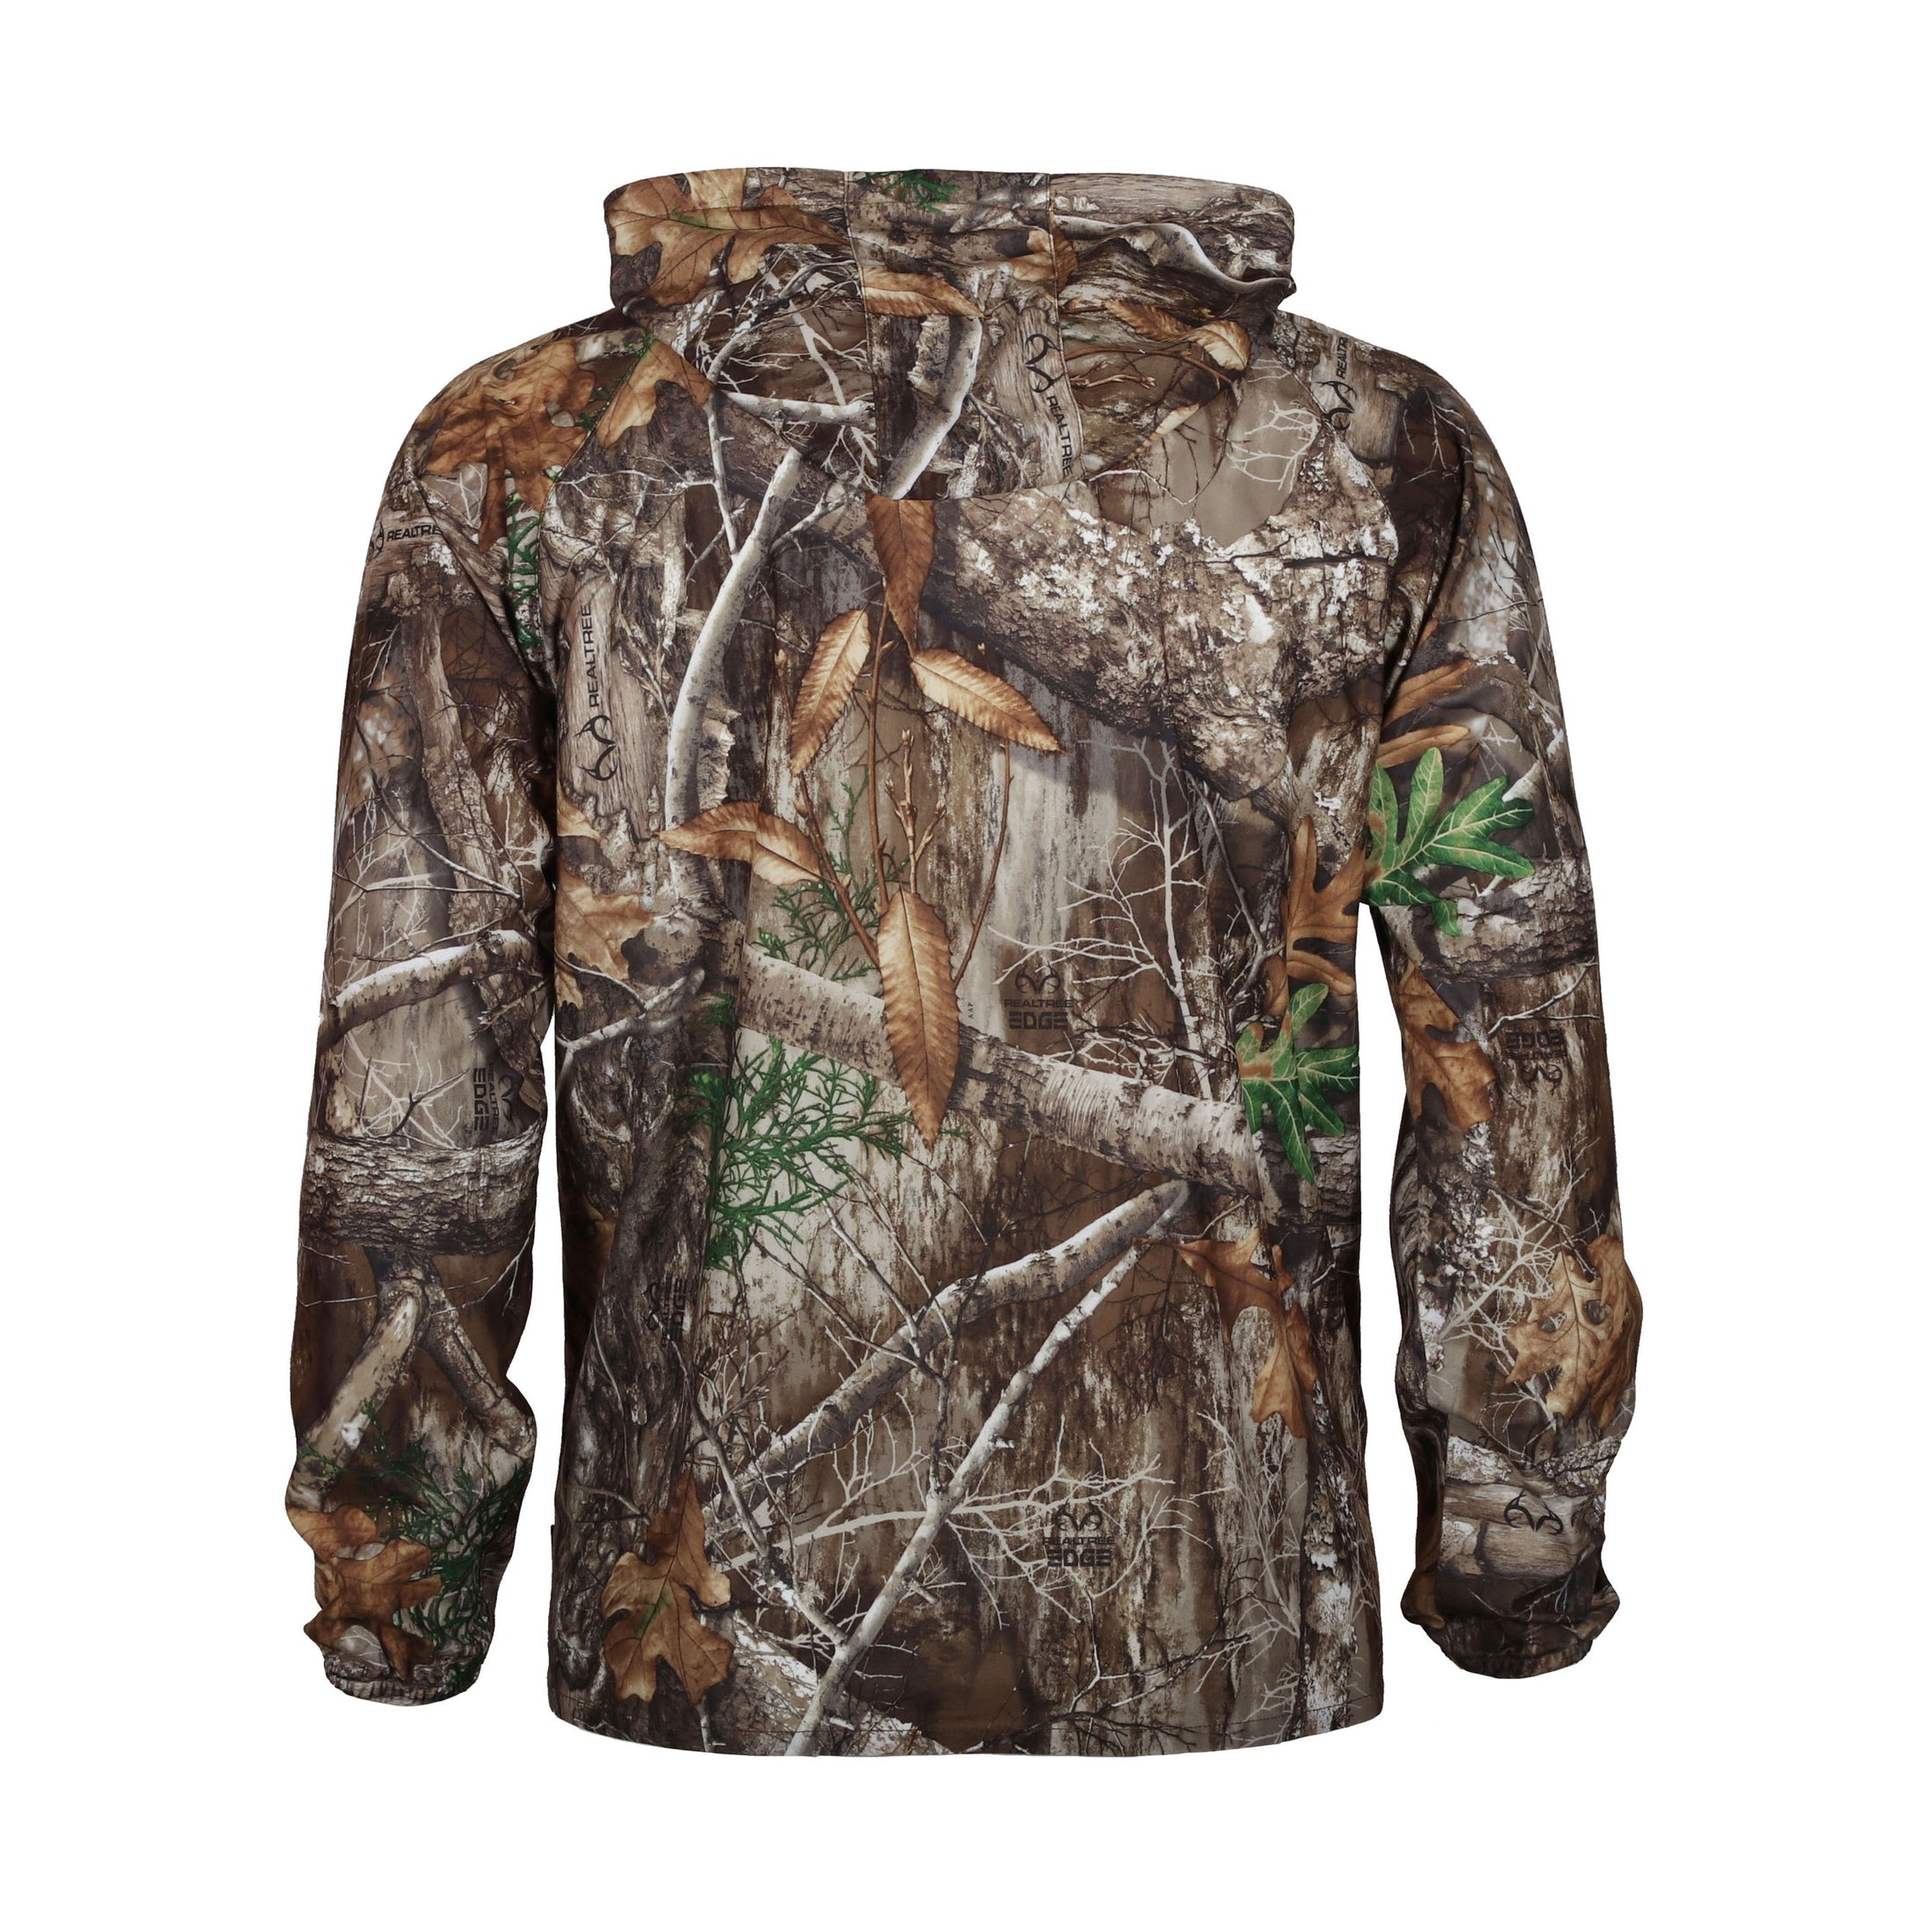 gamehide ElimiTick Insect Repellent Cover Up Jacket back (realtree edge)